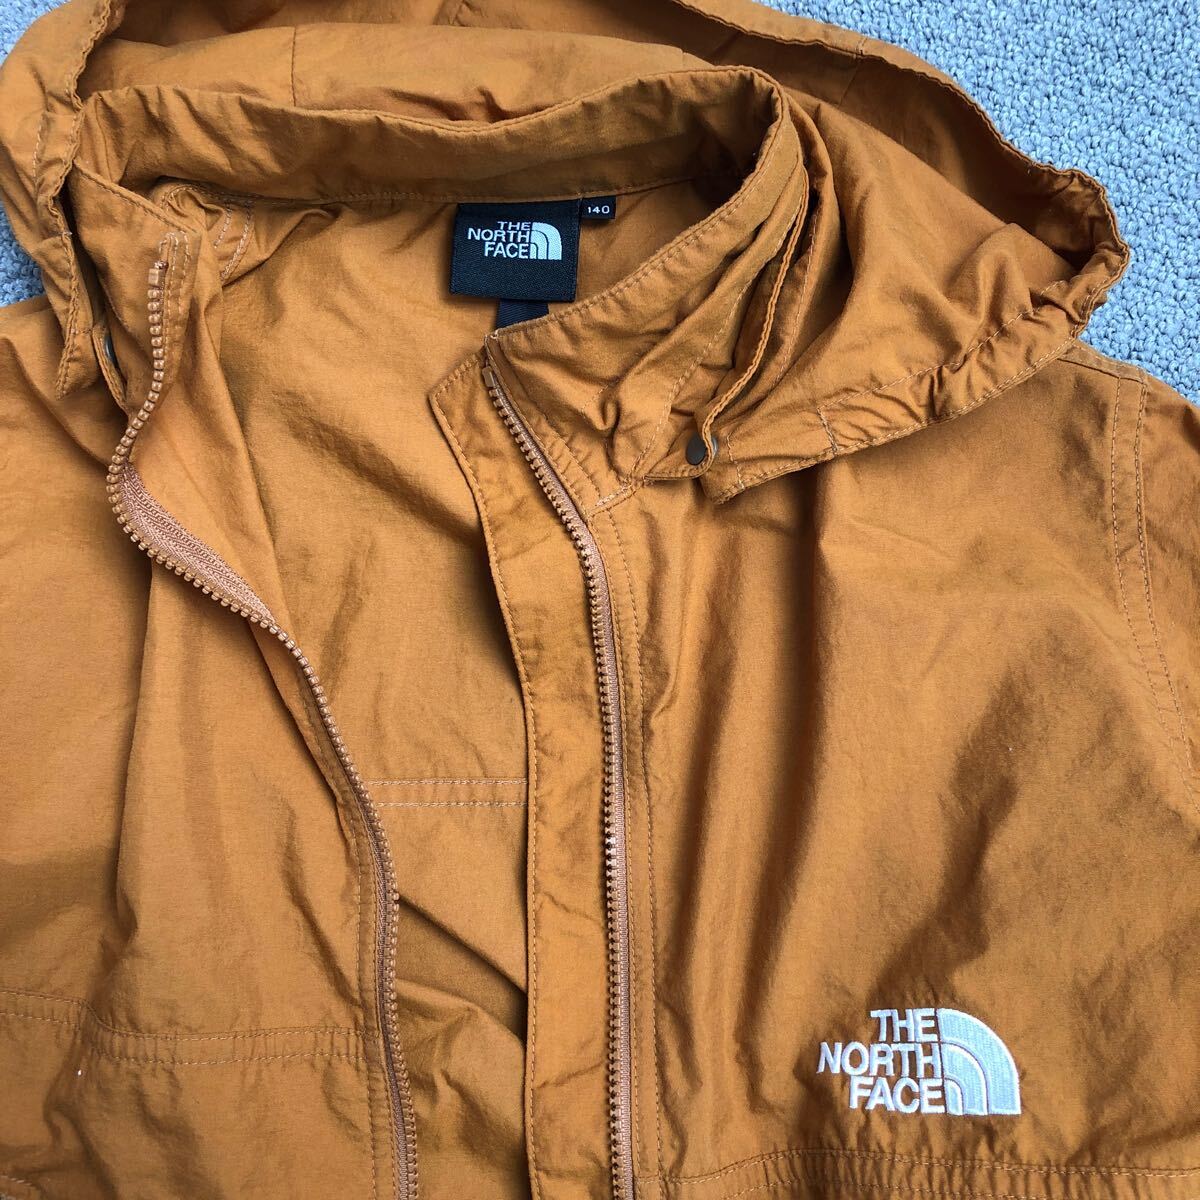 THE NORTH FACE キッズ マウンテンパーカー 140の画像3